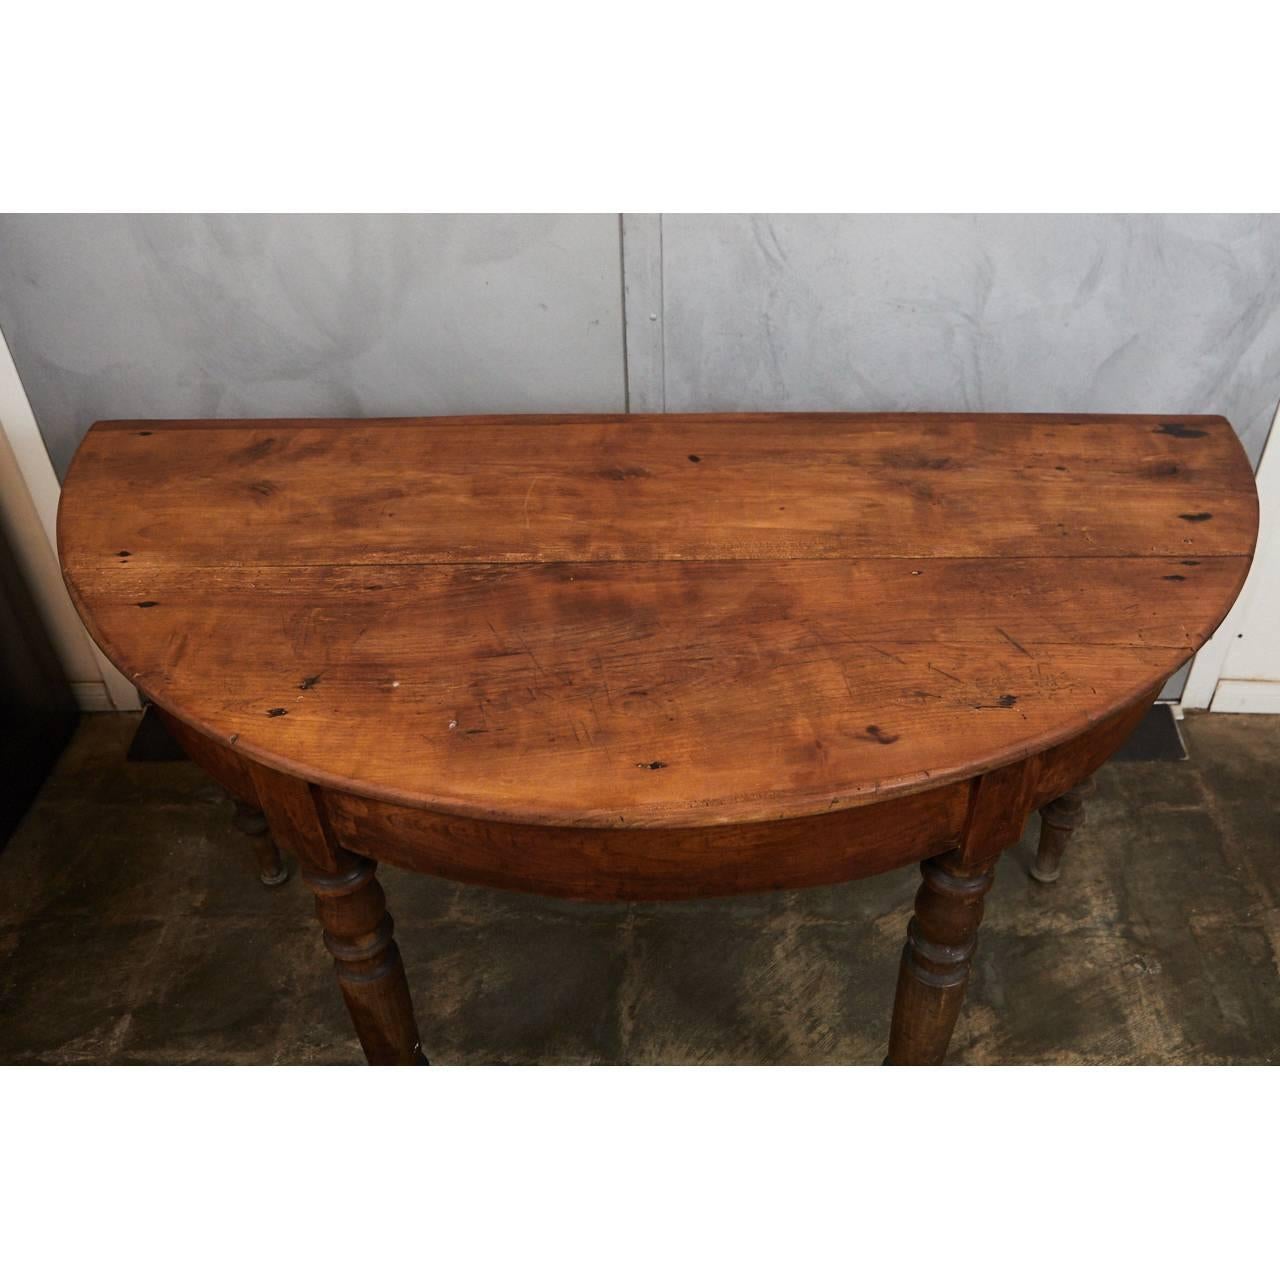 This mid-19th century American table is a well crafted piece of country furniture. The table has four handsomely turned legs that taper to the floor. The table has nice signs of wear indicative of its age.